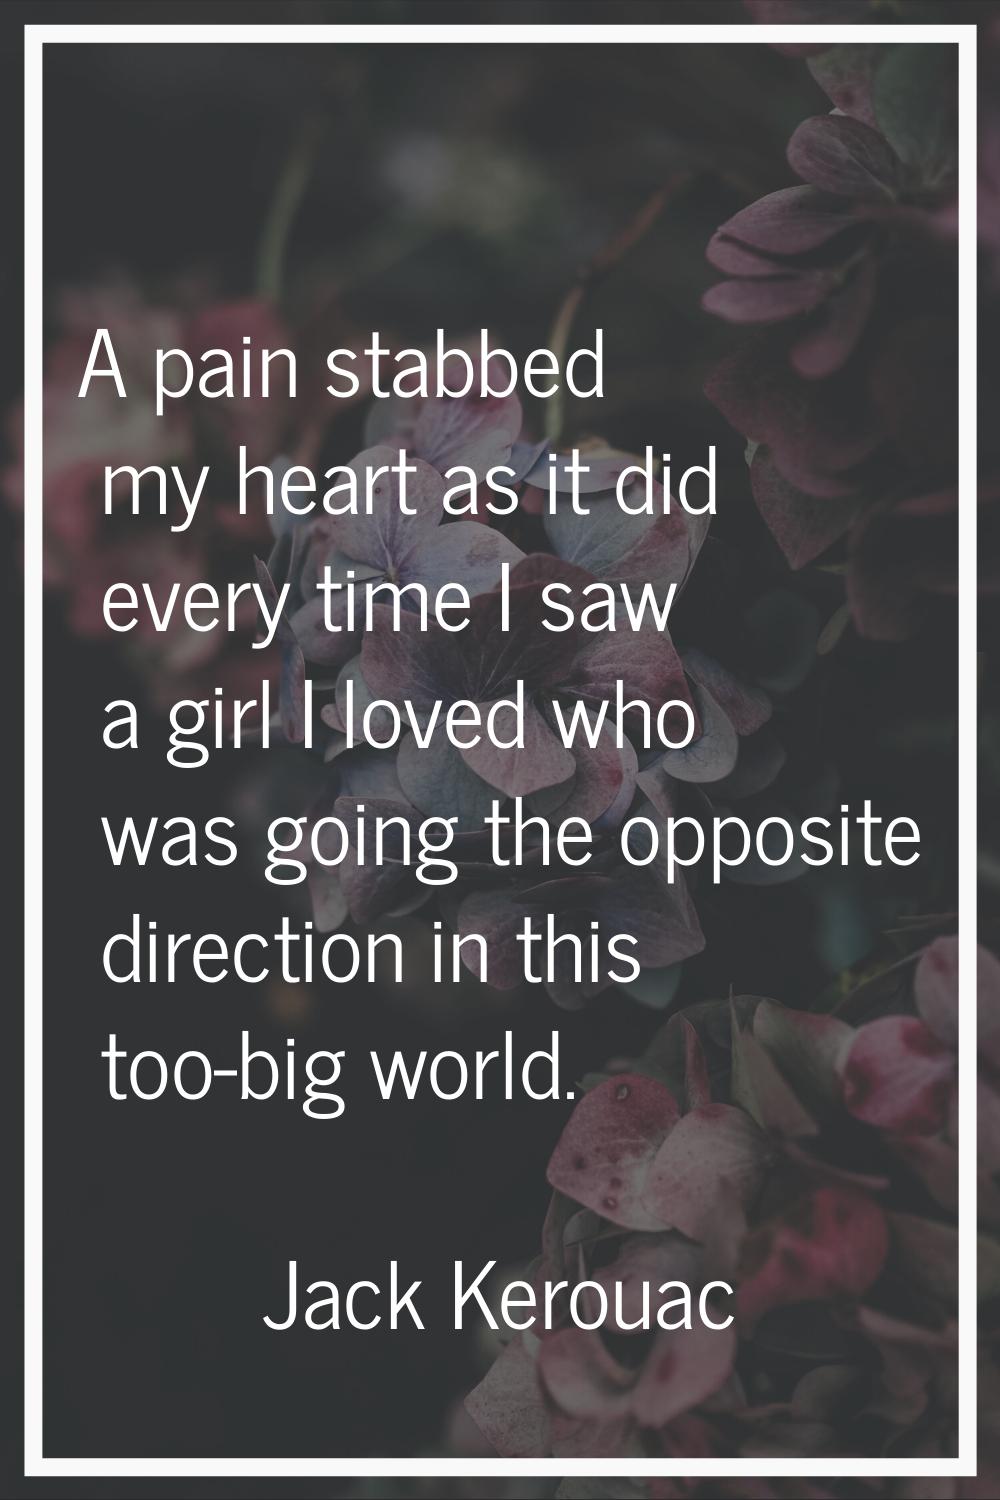 A pain stabbed my heart as it did every time I saw a girl I loved who was going the opposite direct